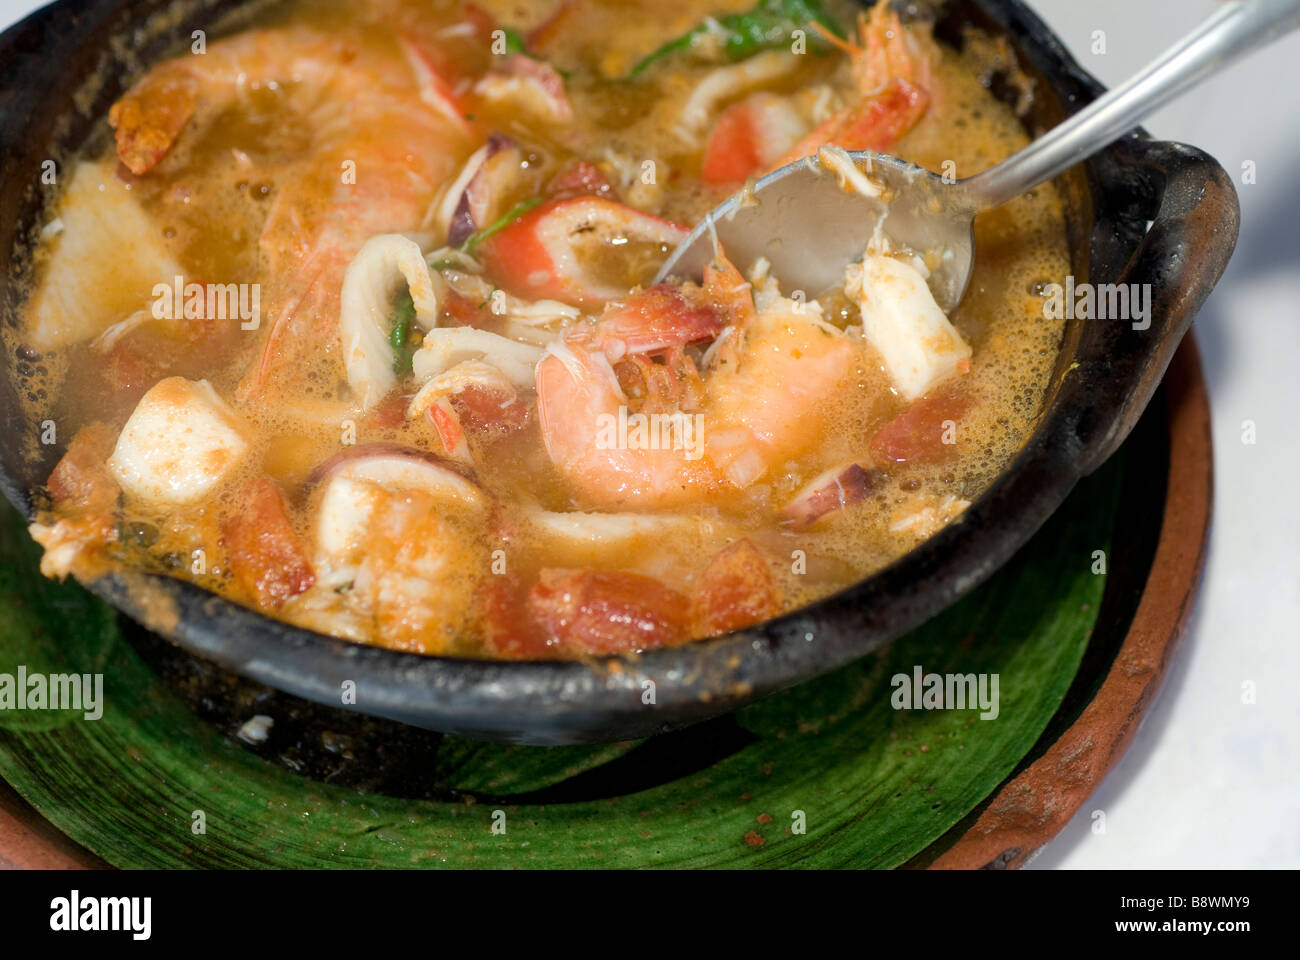 a soup with seafoods Stock Photo